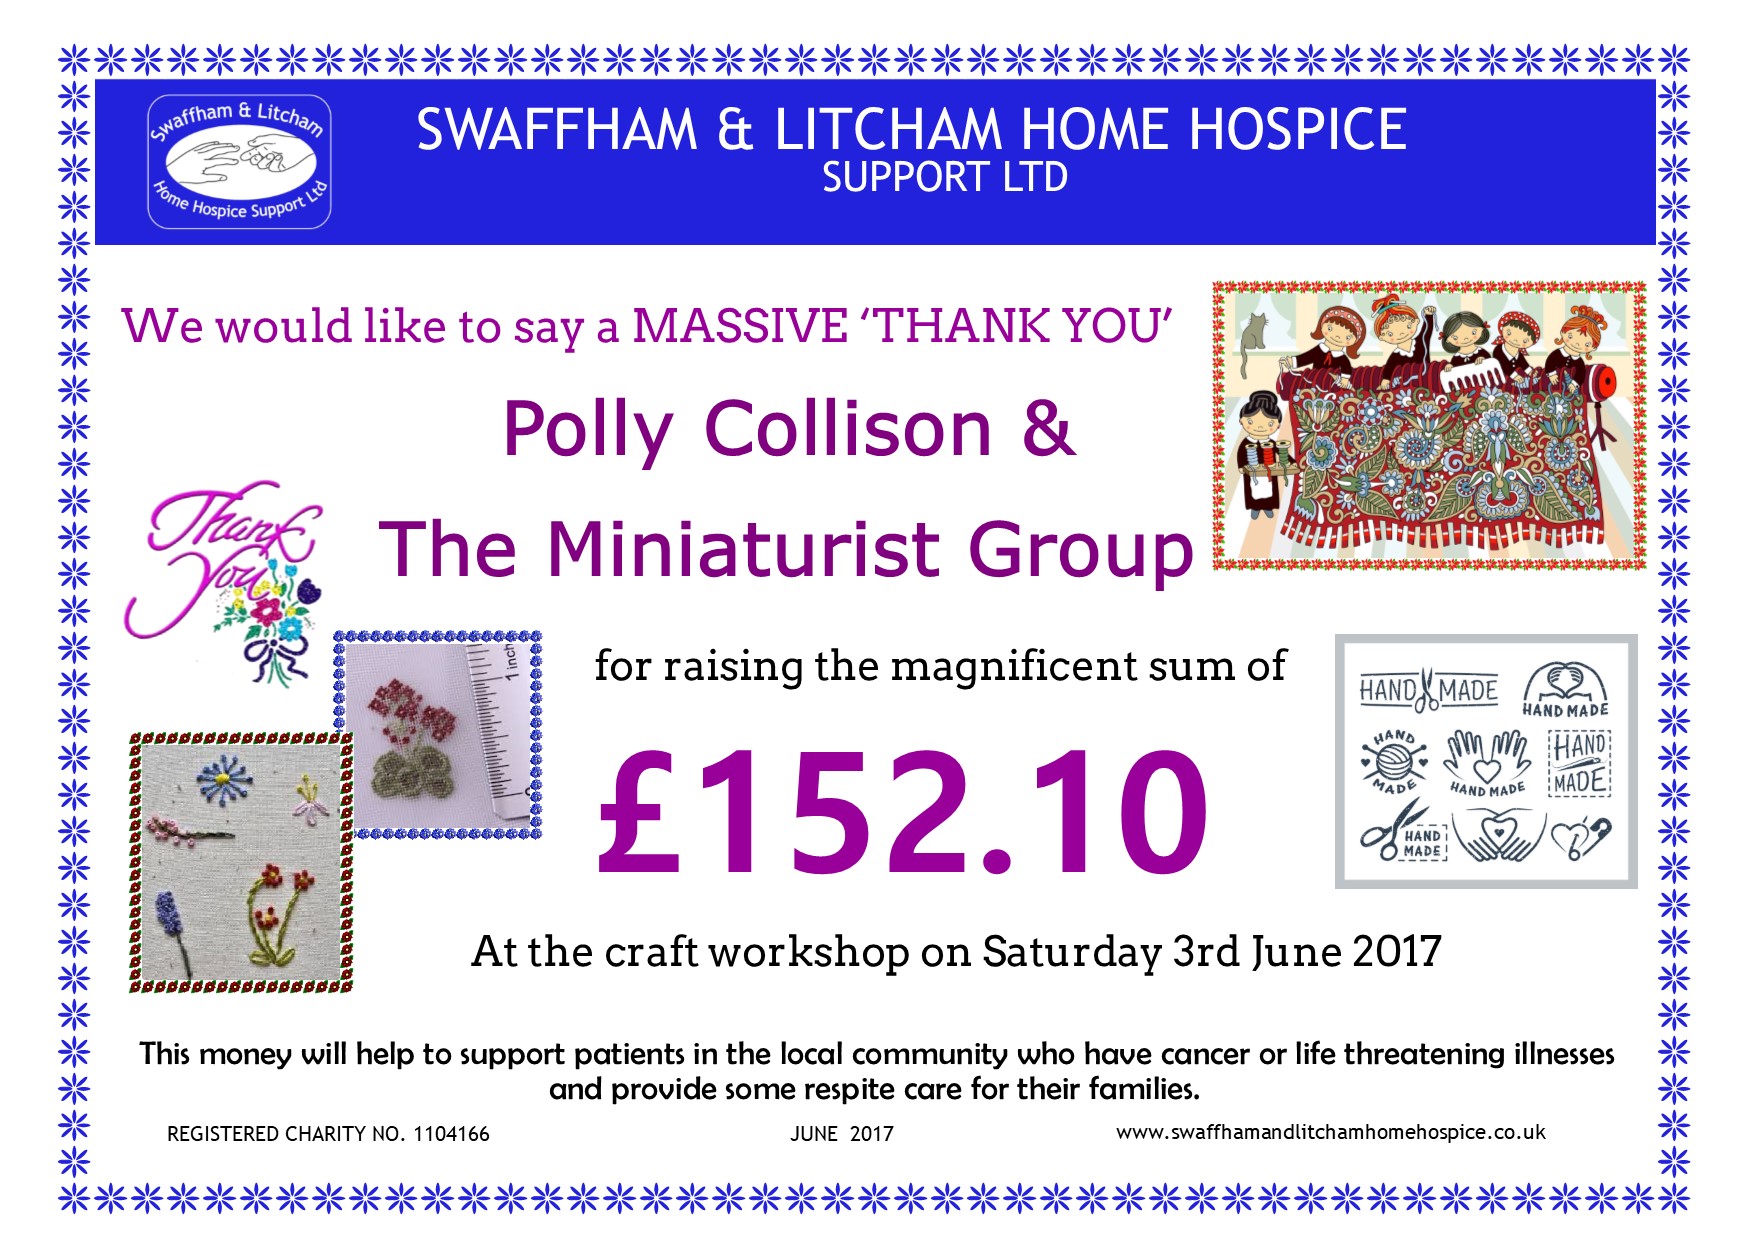 Money raised by Polly Collison and the Miniaturist Group, June 2017